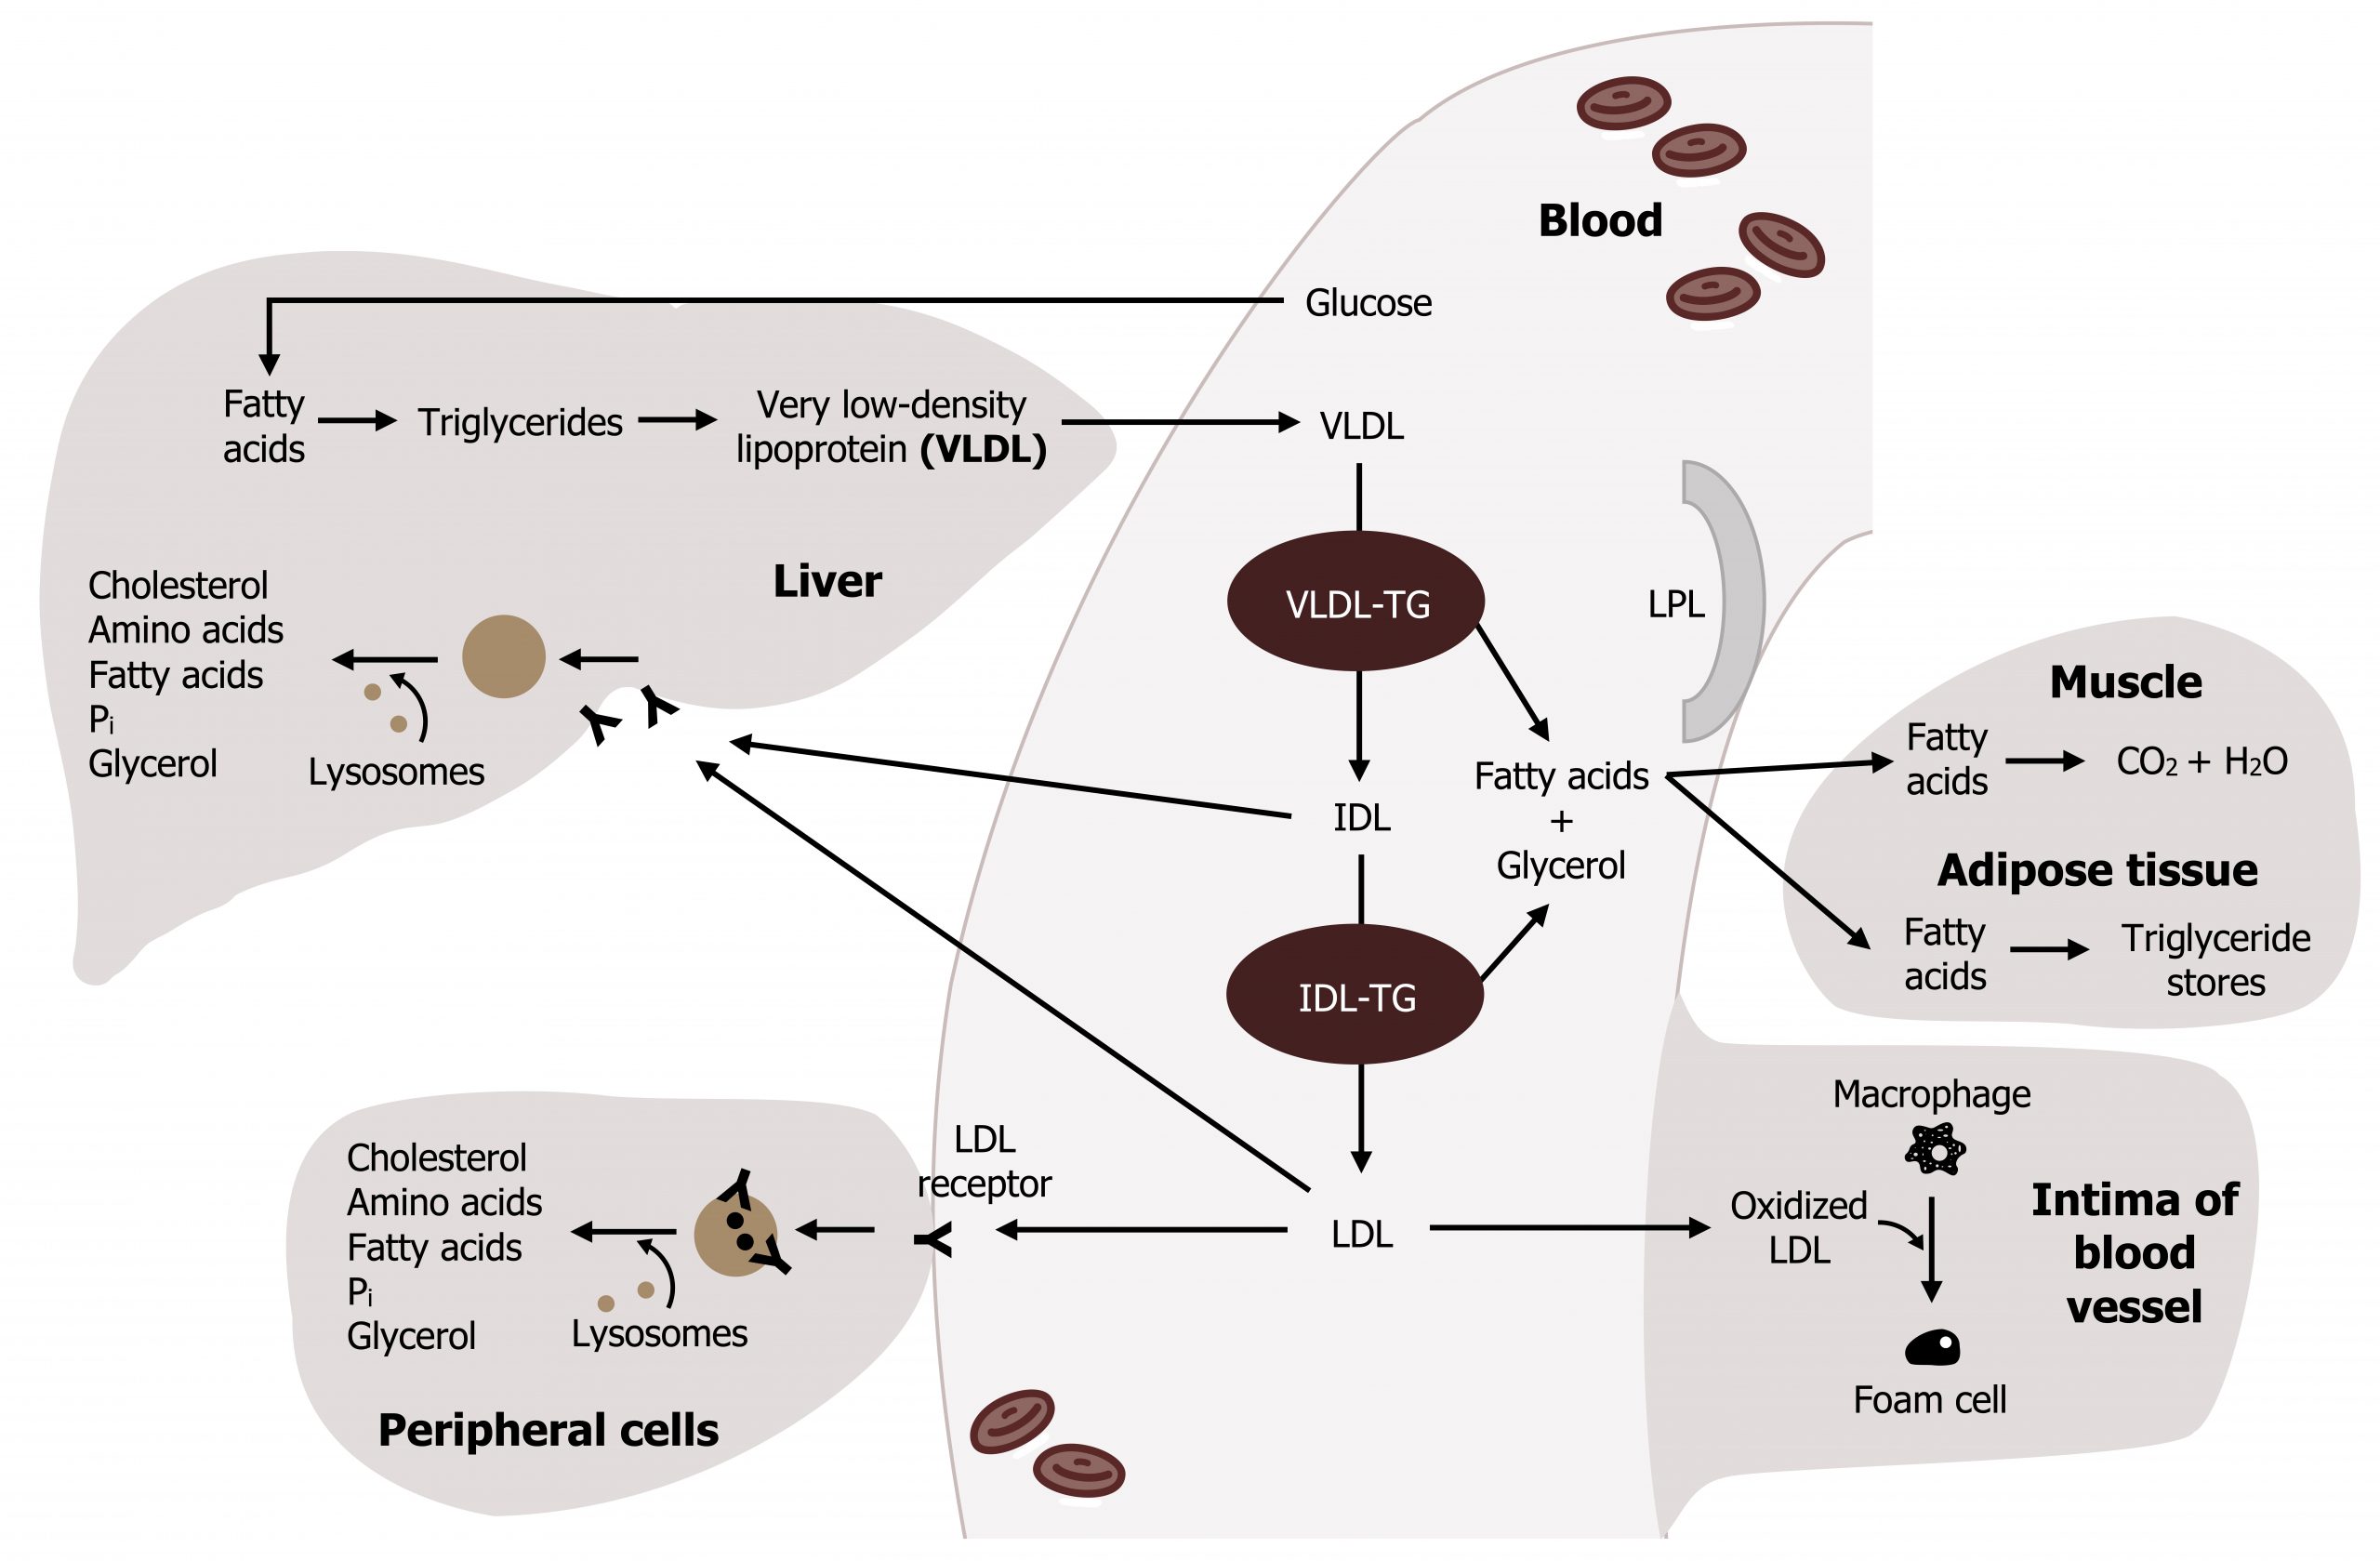 Glucose from blood arrow fatty acids in liver arrow triglycerides arrow very low density lipoprotein (VLDL) moves into blood arrow VLDL-TG arrow to IDL arrows to IDL-TG and to liver receptors. IDL-TG arrows to LDL and liver receptors. LDL arrows to receptors in peripheral cells and liver, arrow with lysosomes to cholesterol, amino acids, fatty acids, Pi, and glycerol. LDL arrow oxidized LDL in the intima of blood vessels that points to an arrow in between macrophage and foam cell. Fatty acids and glycerol from VLDL-TG and IDL-TG follow the same path in muscle and adipose tissue of figure 6.7.